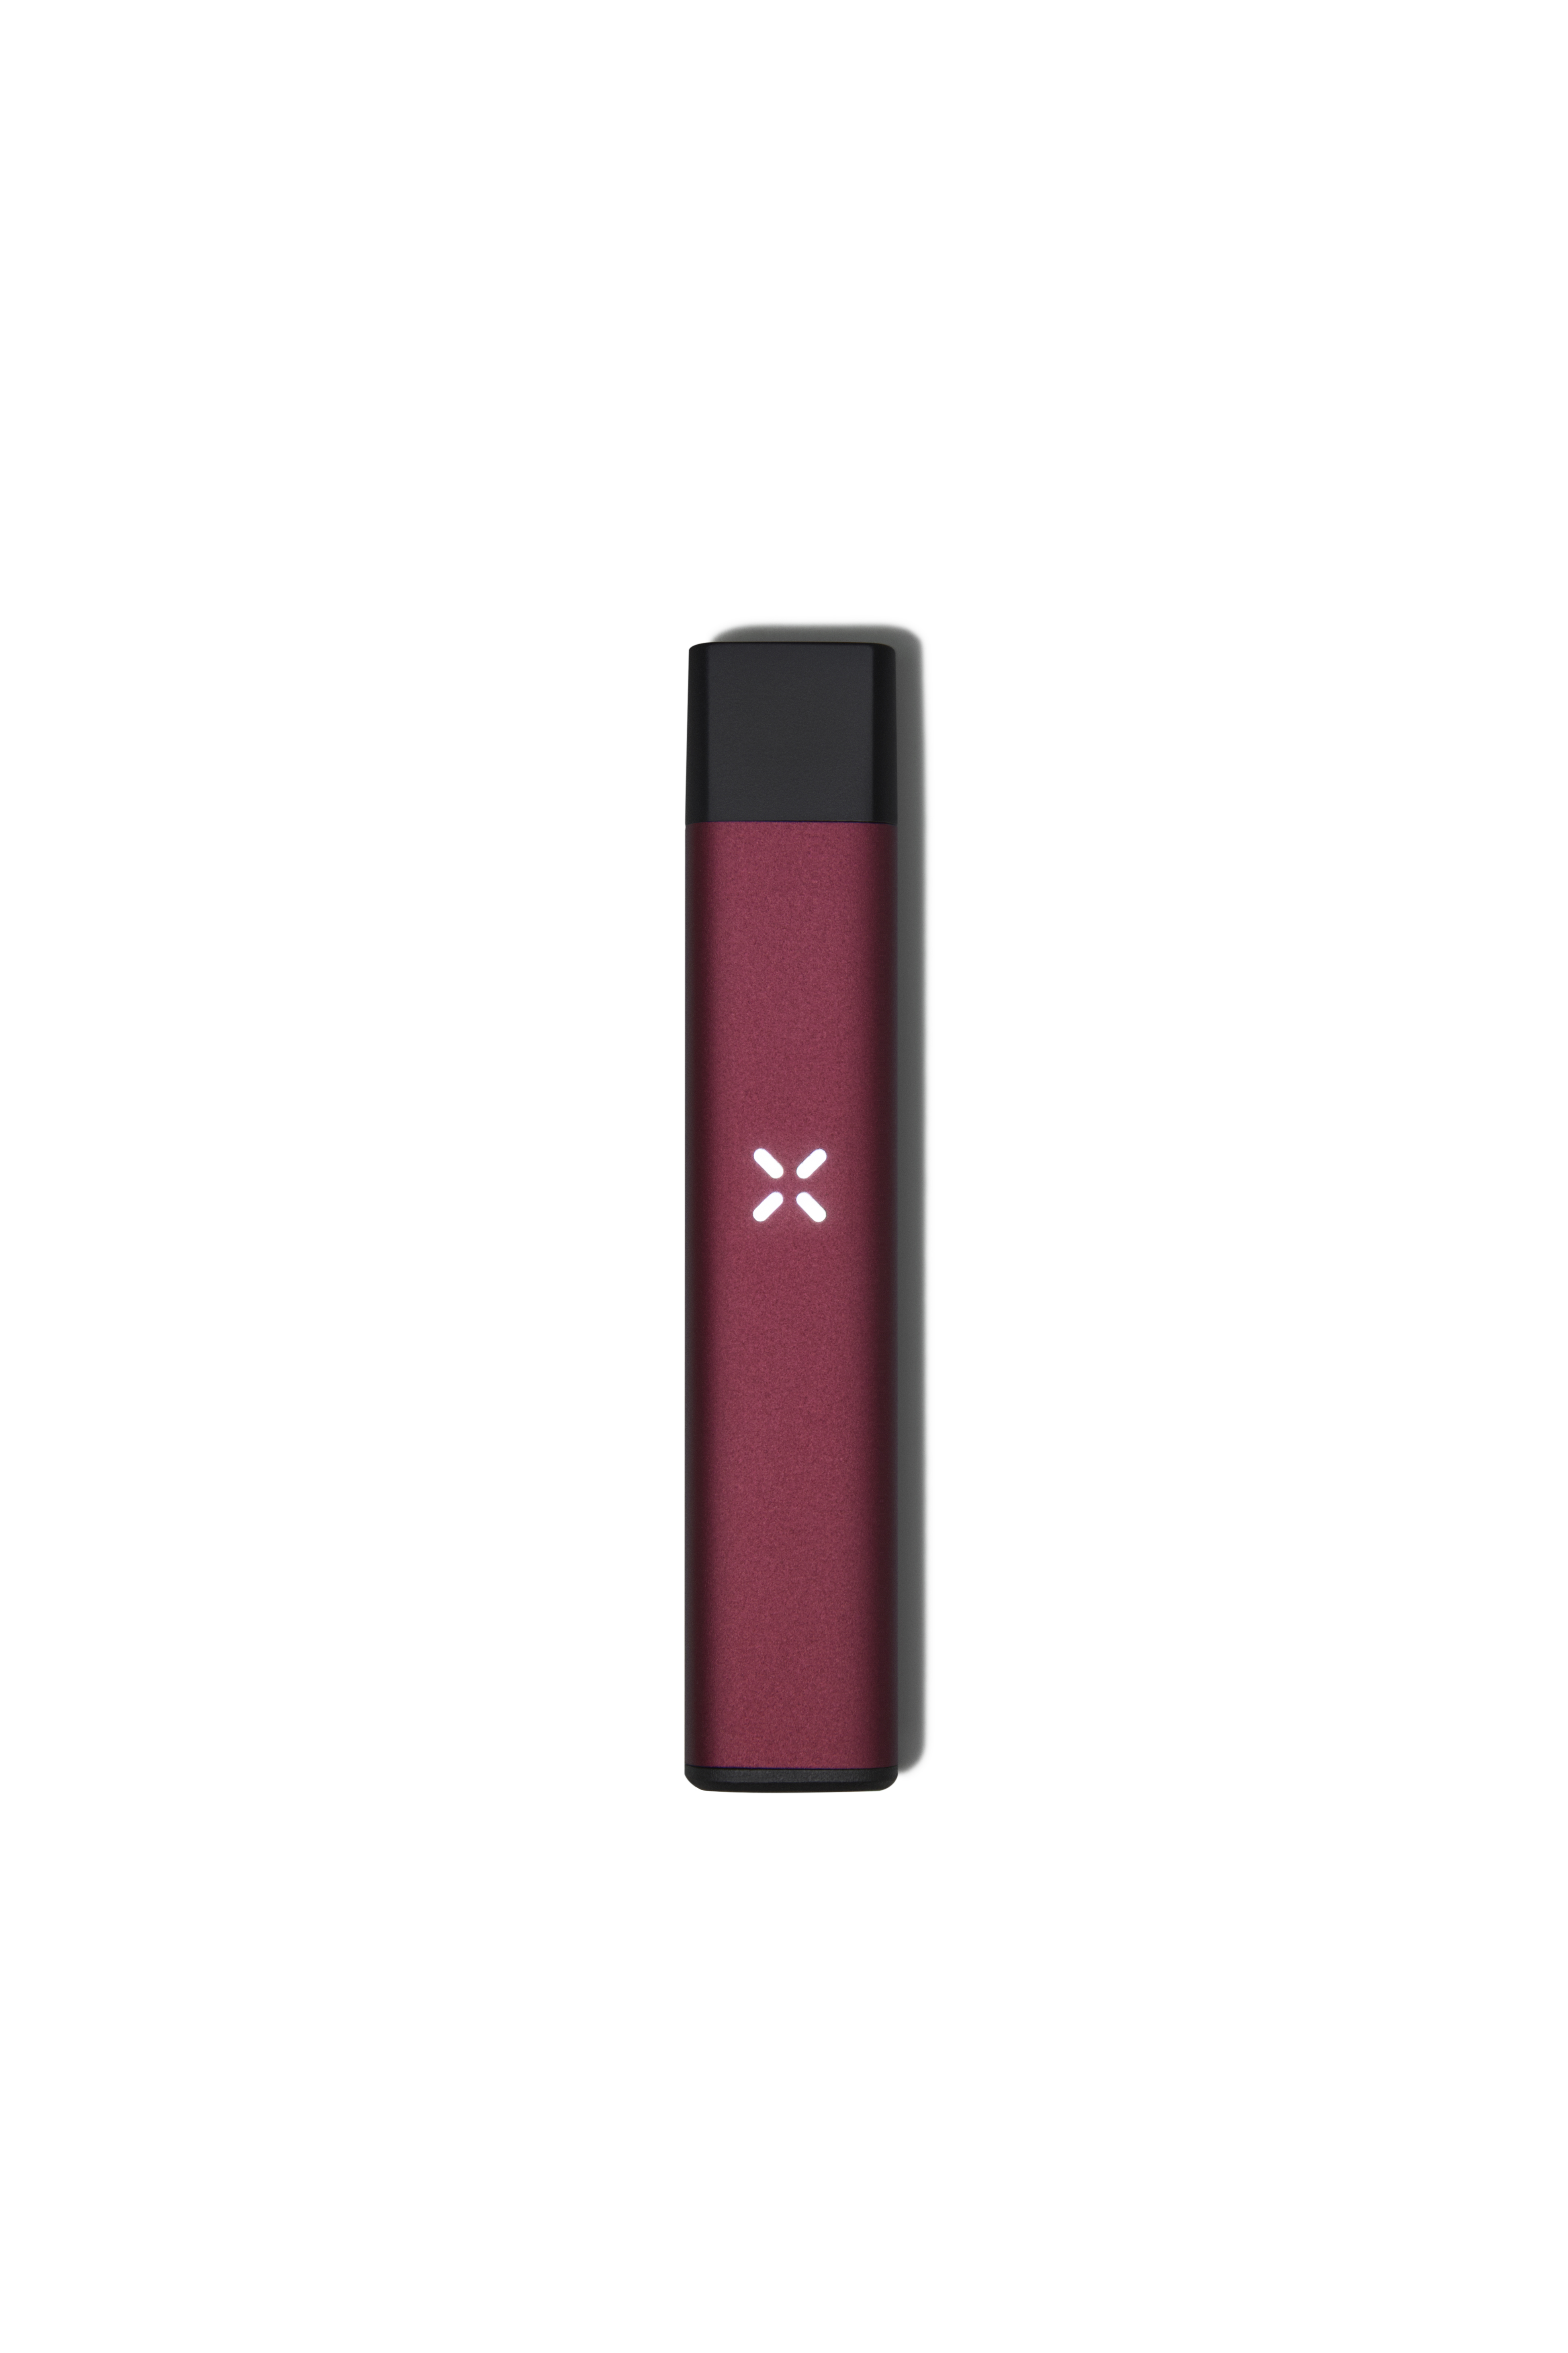 A photograph of Pax Era Pro Device (Red)